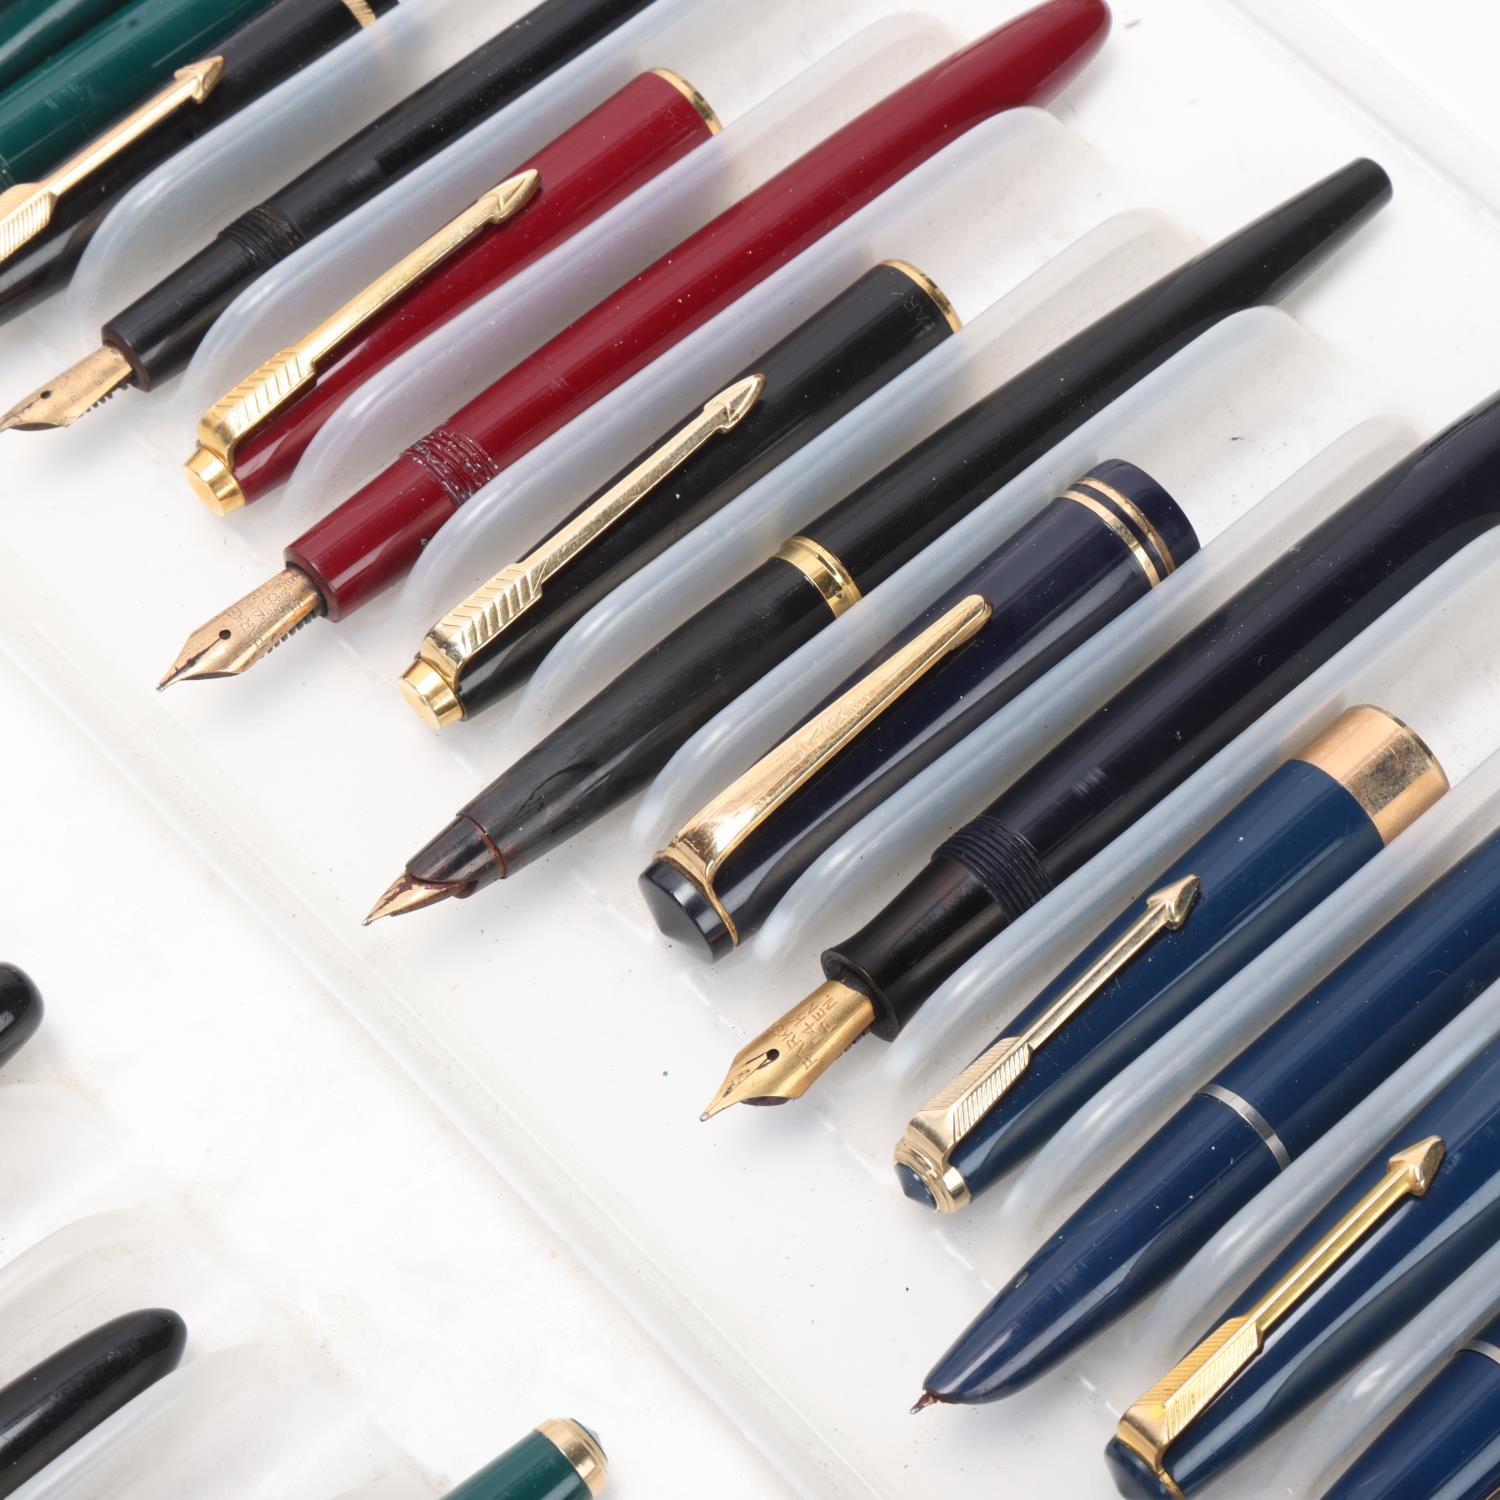 17 Parker fountain pens most 1950s-1970s', including models No17, Junior, Senior, Slimfold, Duofold, - Image 4 of 4